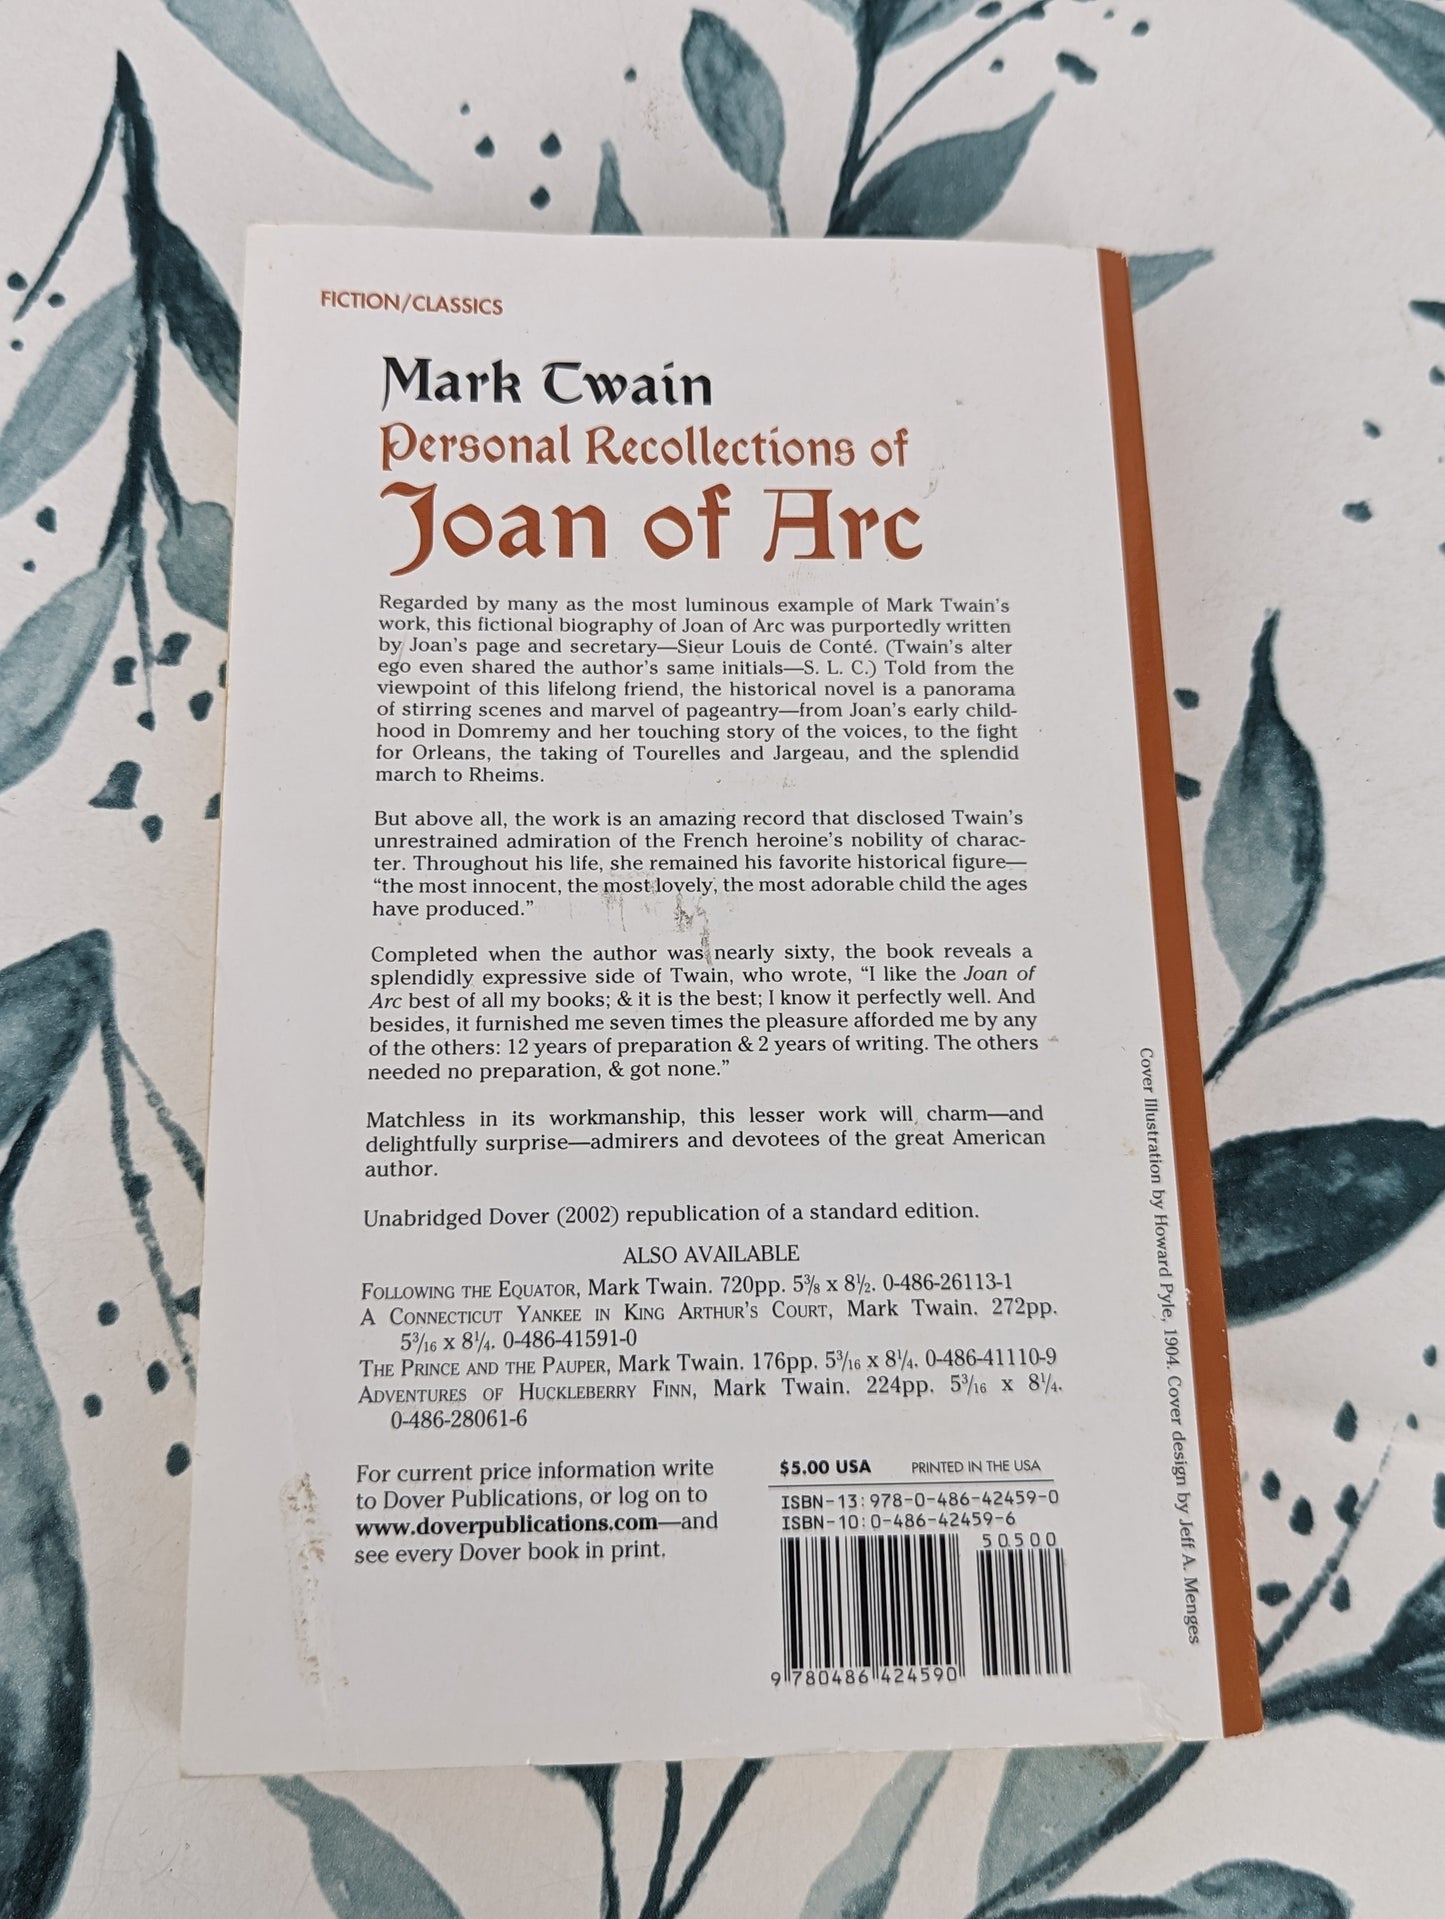 Personal Recollections of Joan of Arc (by Mark Twain)